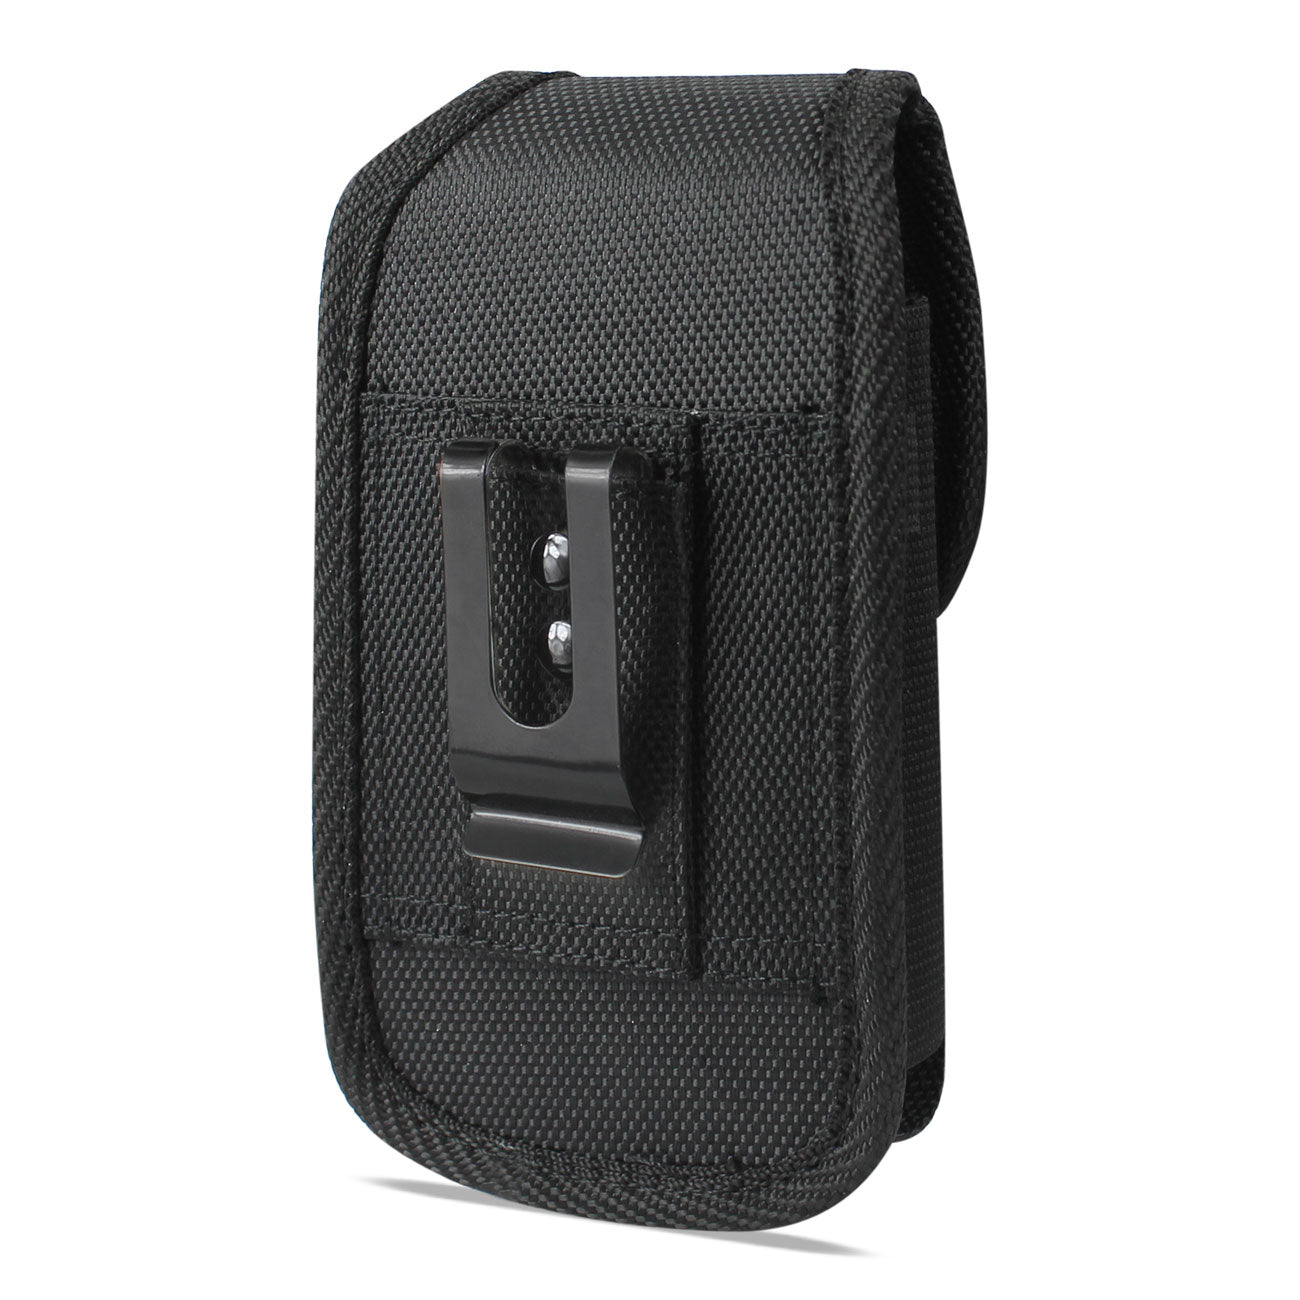 Vertical Rugged Pouch/Phone Holster With Buckle Front Black In Cardboard Packaging